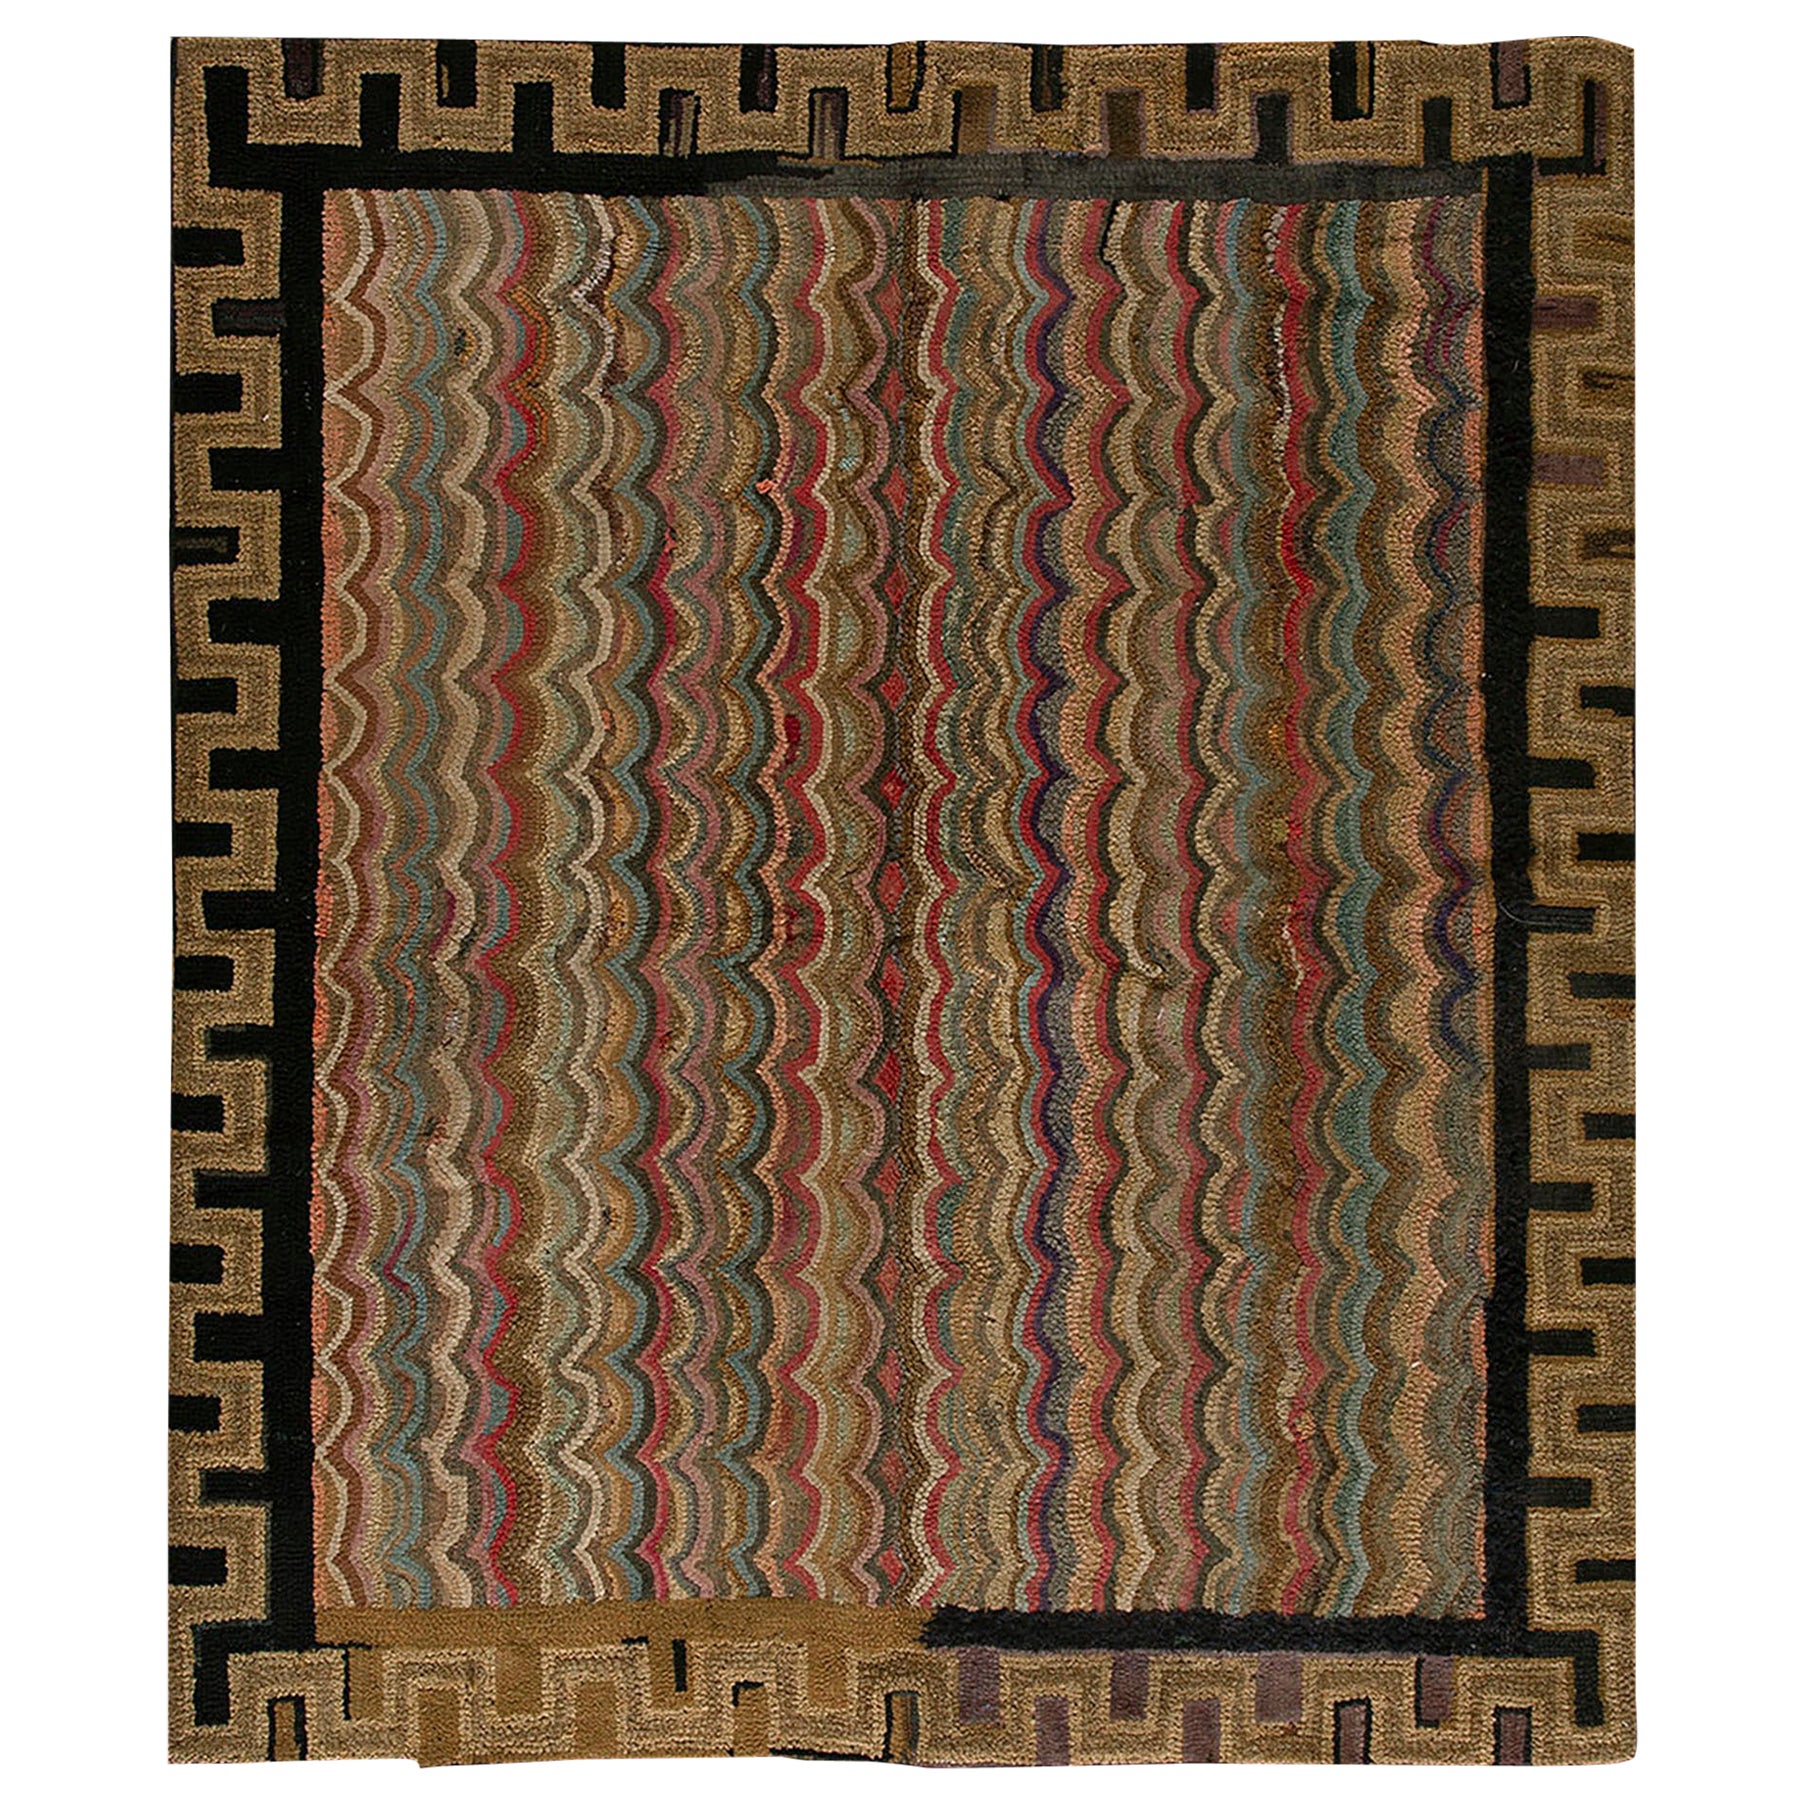 Antique American Hooked Rug 4'2"x4'10" For Sale